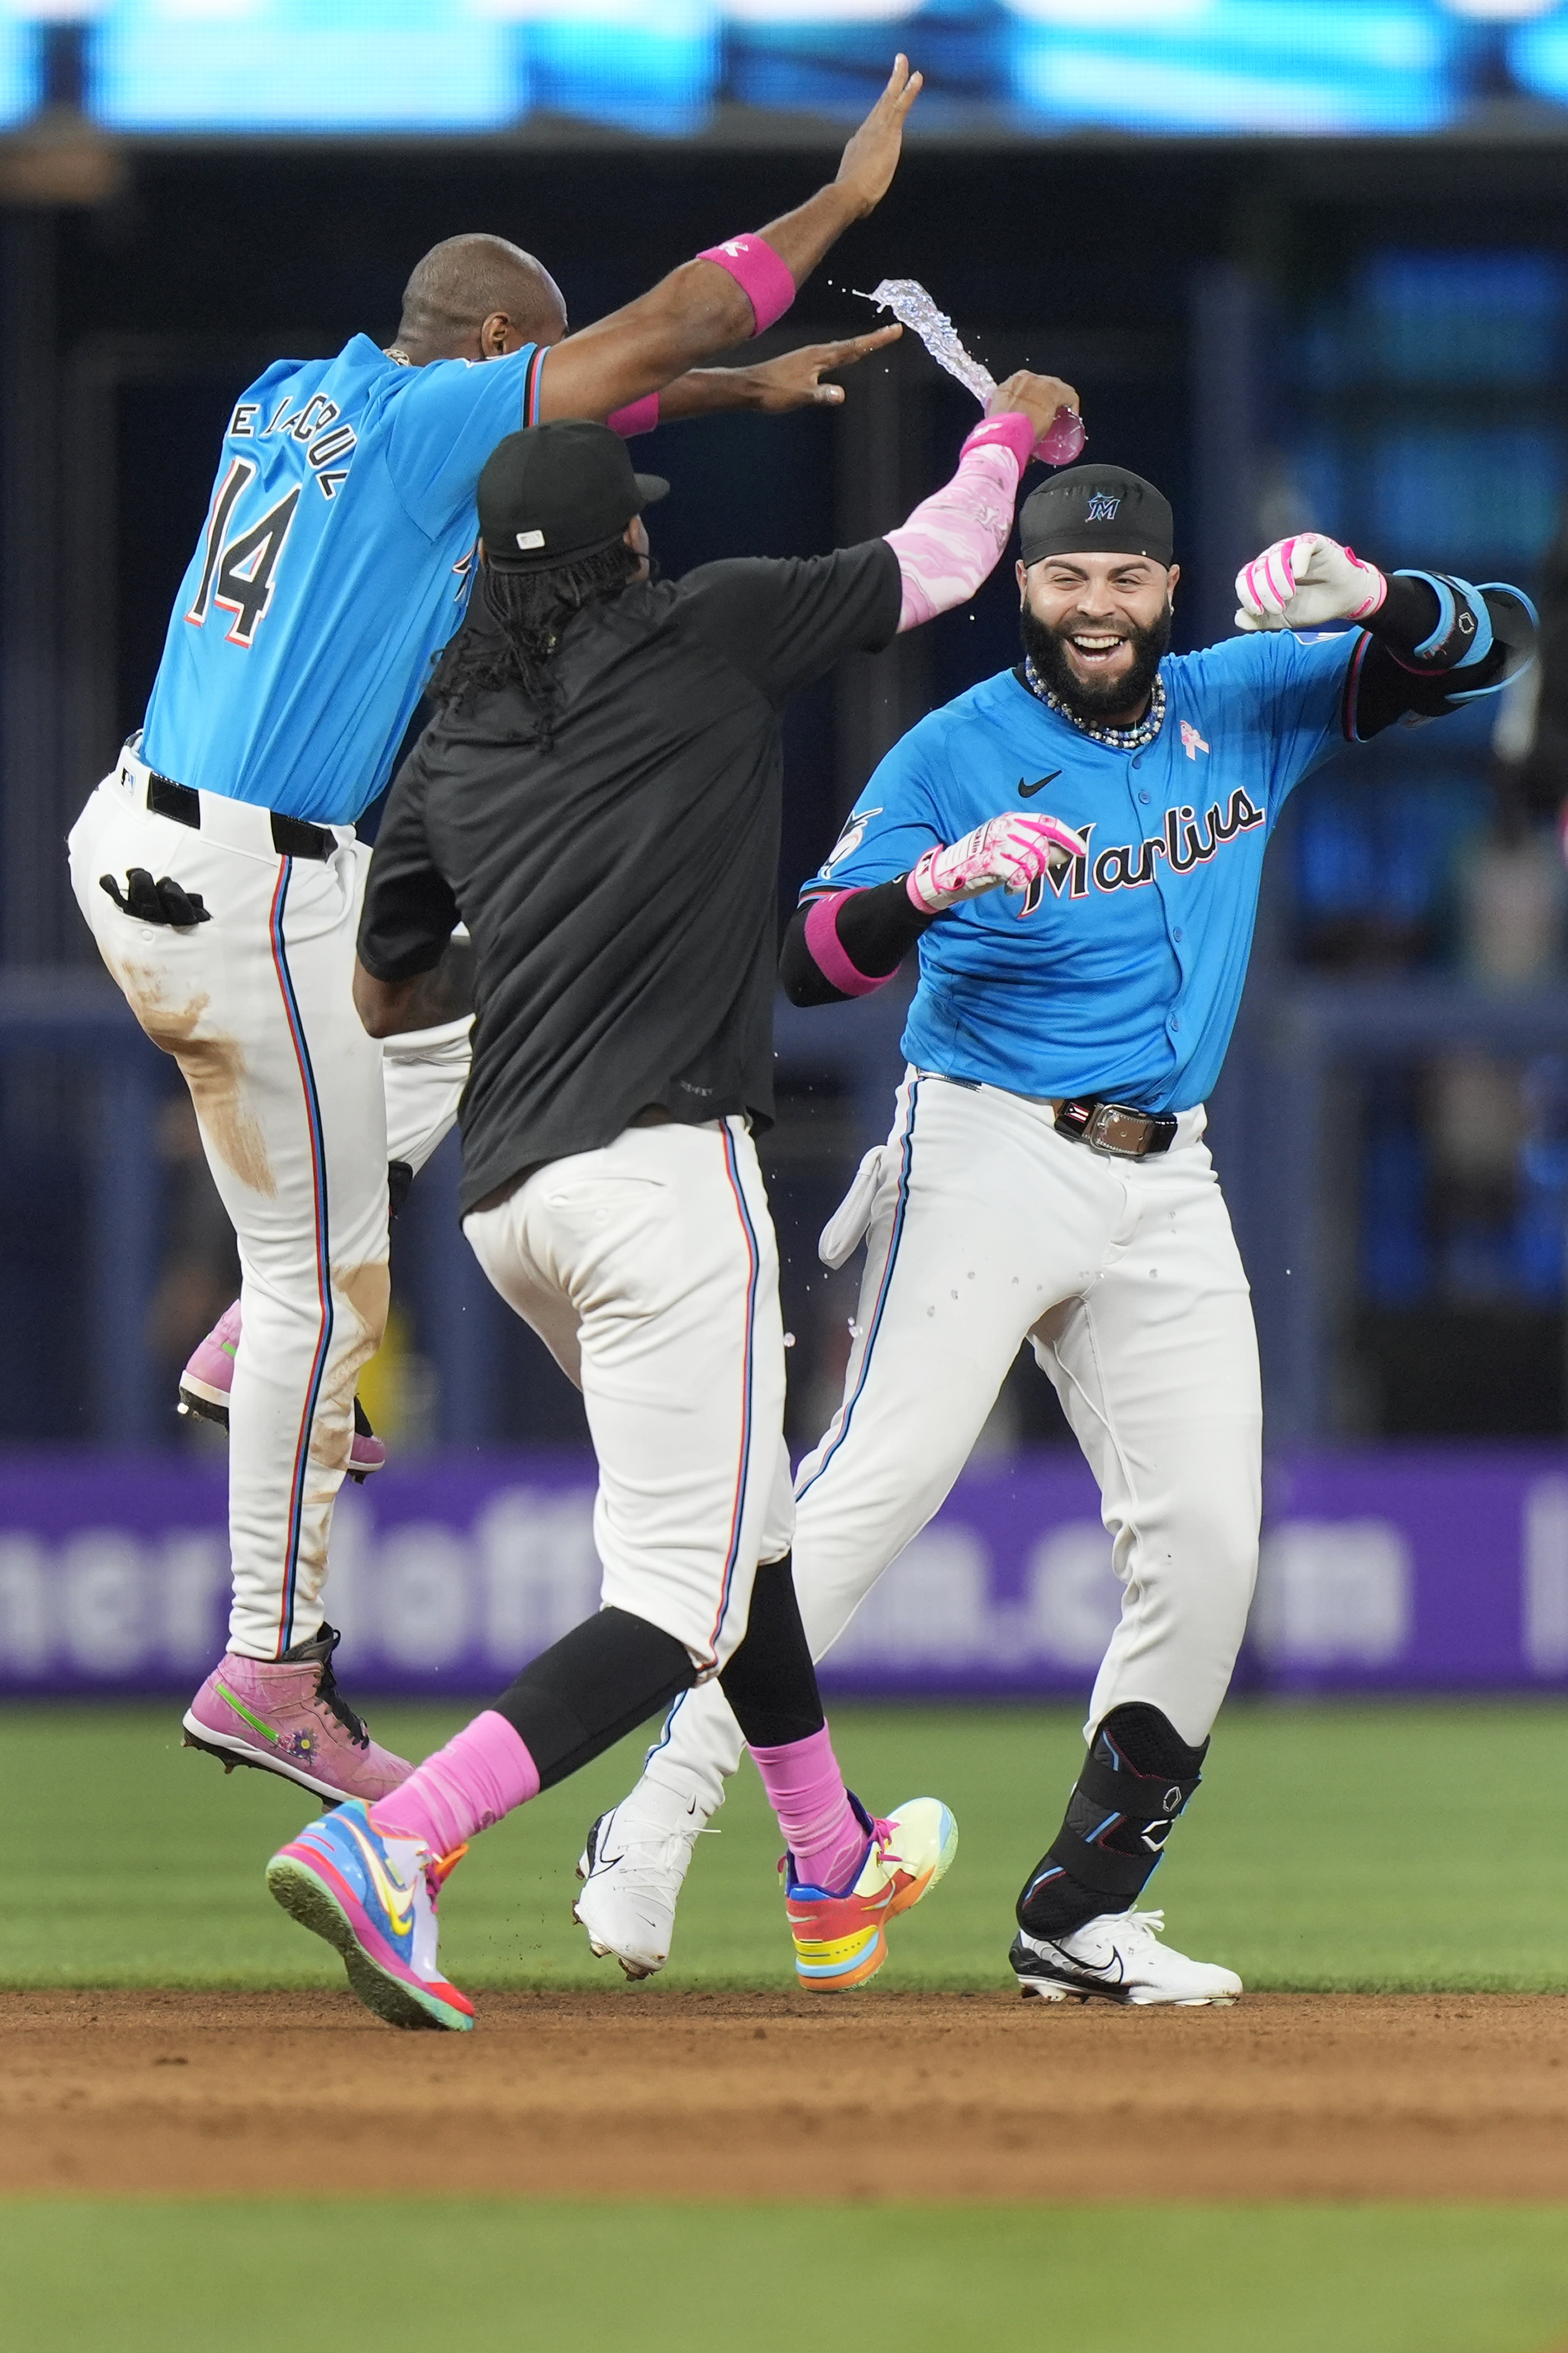 Emmanuel Rivera's game-winning pinch-hit single in 10th lifts Marlins to 7-6 win over Phillies